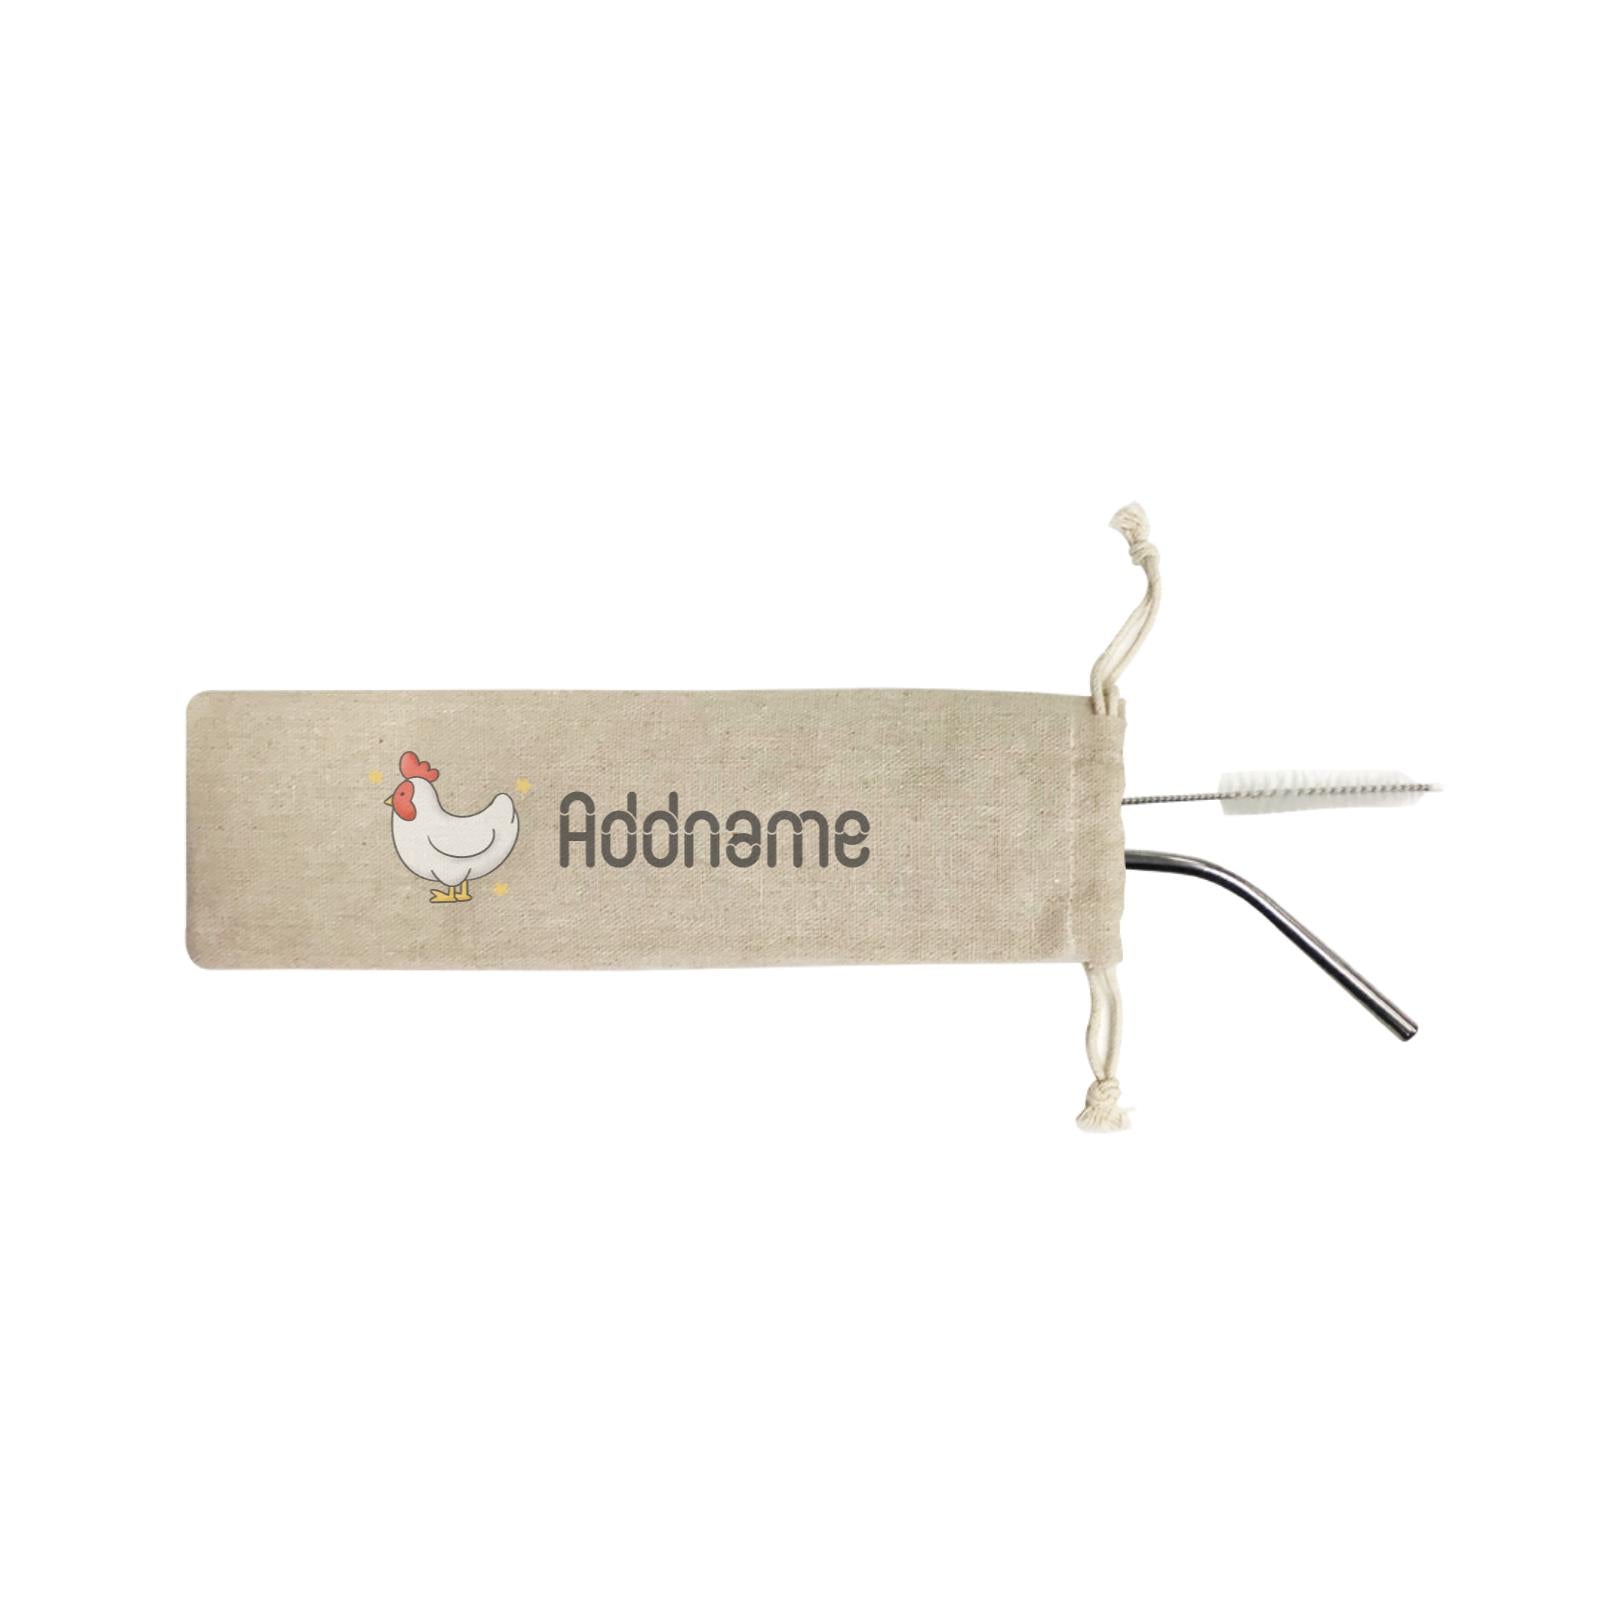 Cute Hand Drawn Style Rooster Addname ST SZP 2-in-1 Stainless Steel Straw Set In a Satchel